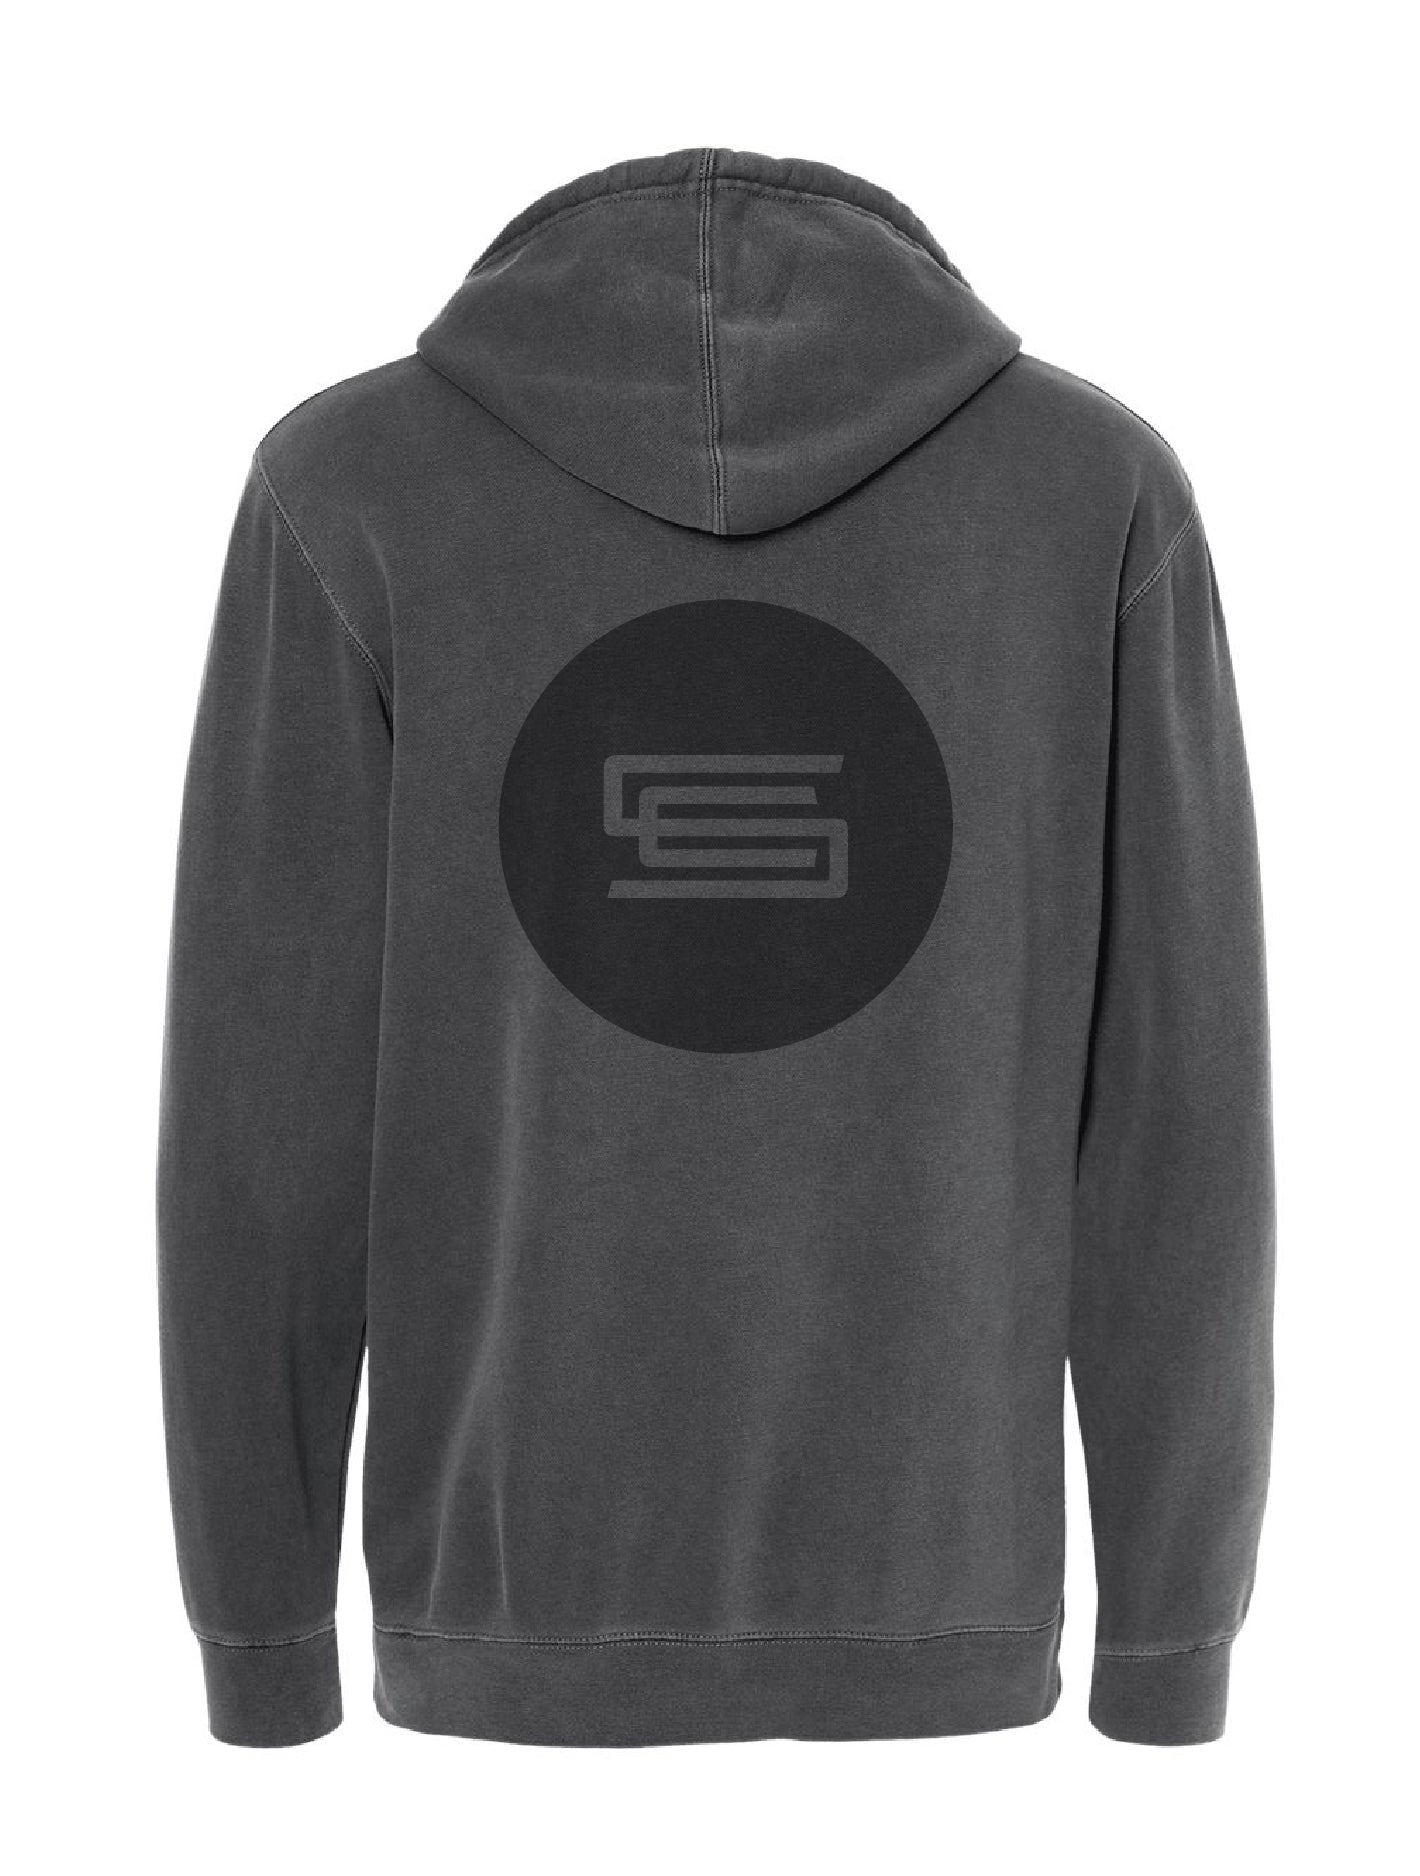 Silver City Brewery · Pigment Black Pullover Hoodie